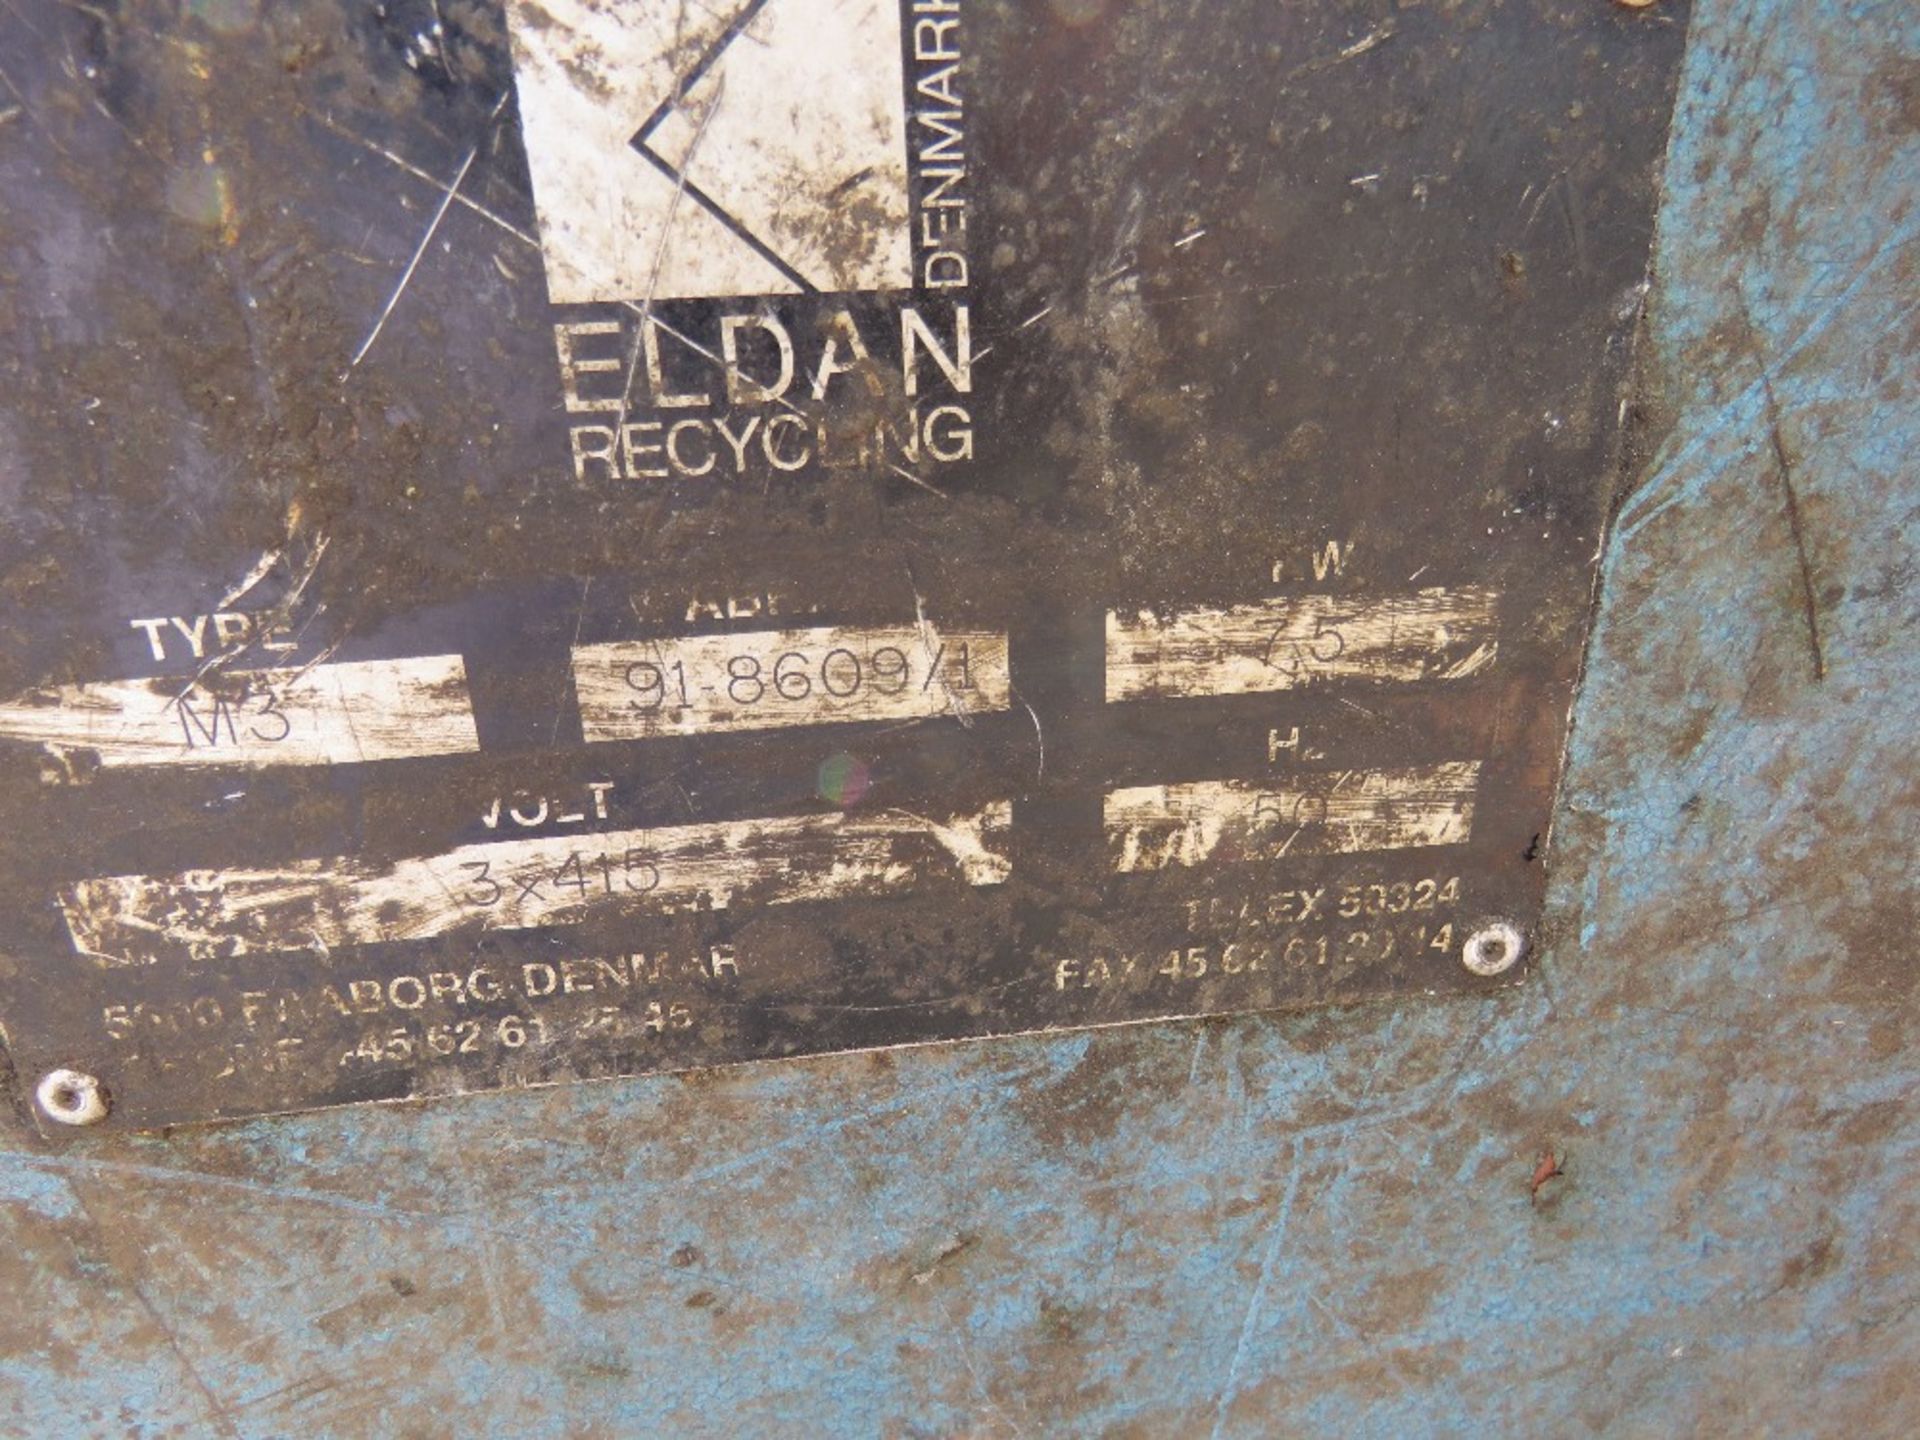 ELDAN M3 CABLE STRIPPER UNIT, 3 PHASE. WORKING WHEN REMOVED. NO VAT ON HAMMER PRICE. - Image 3 of 6